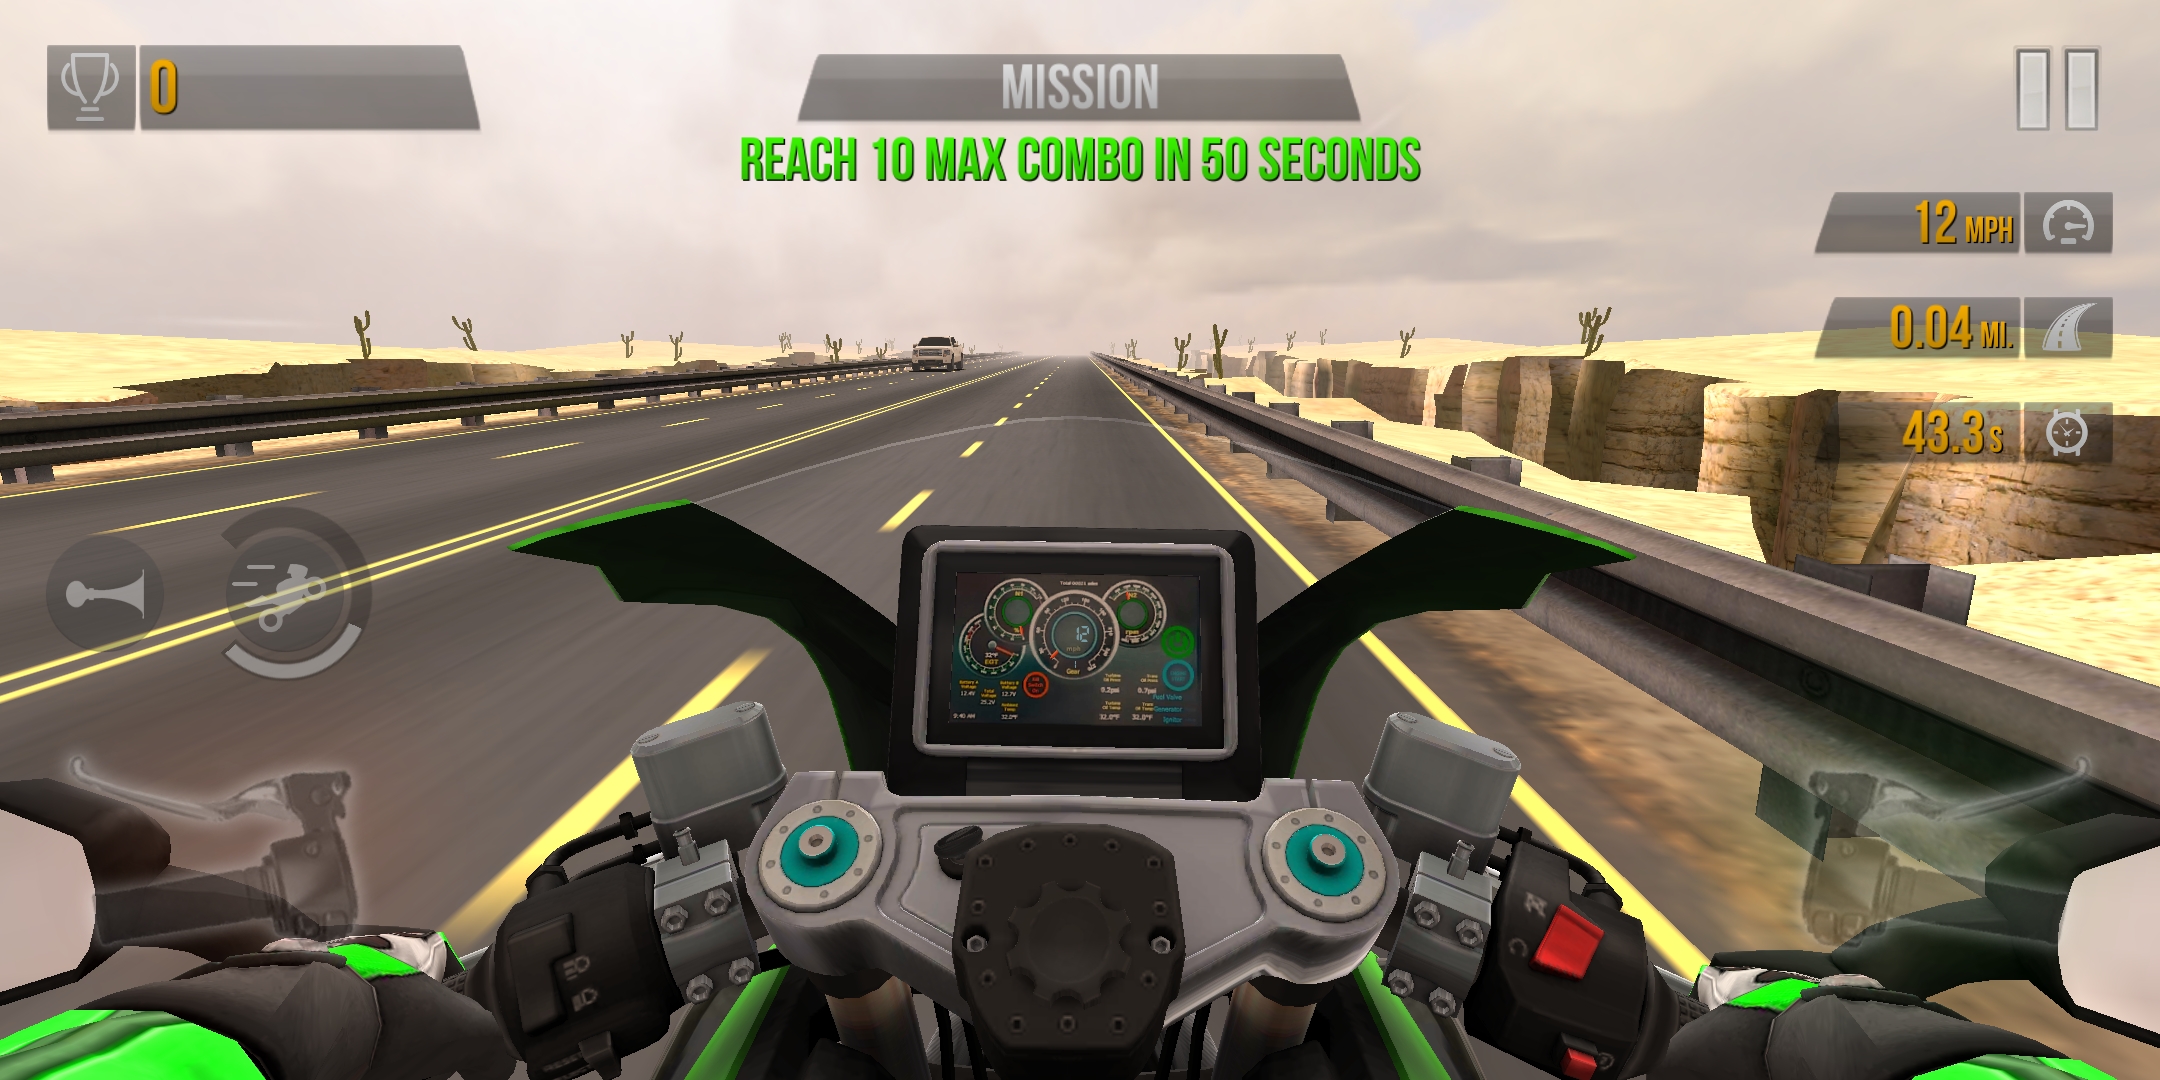 traffic rider game official website